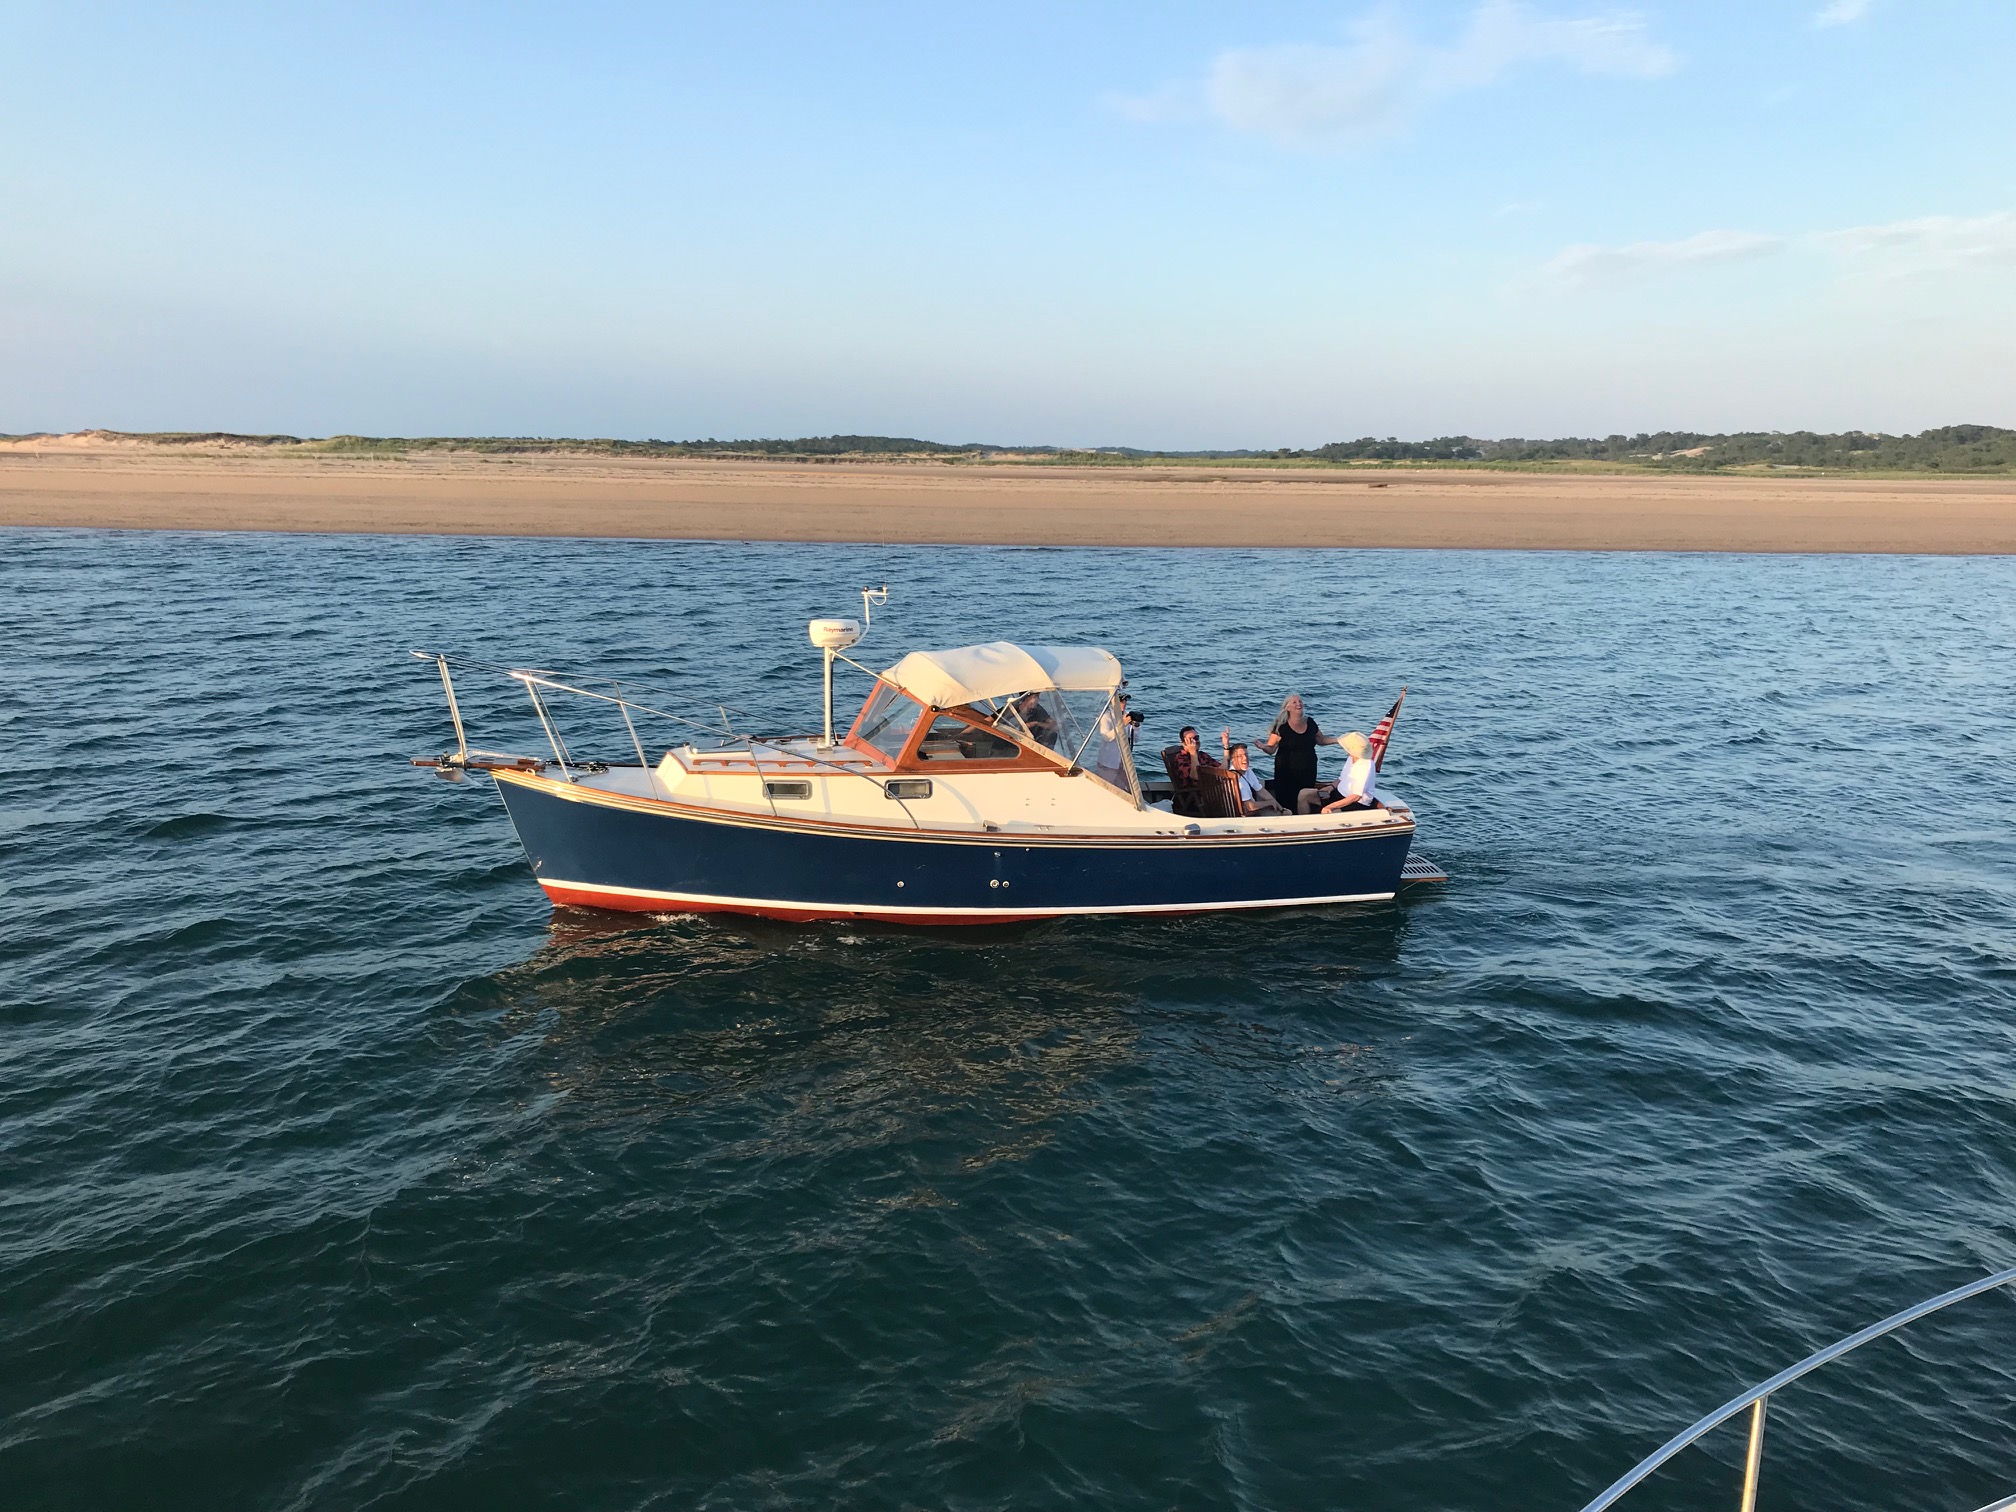 Bethie with passengers onboard off Race Point in Provincetown